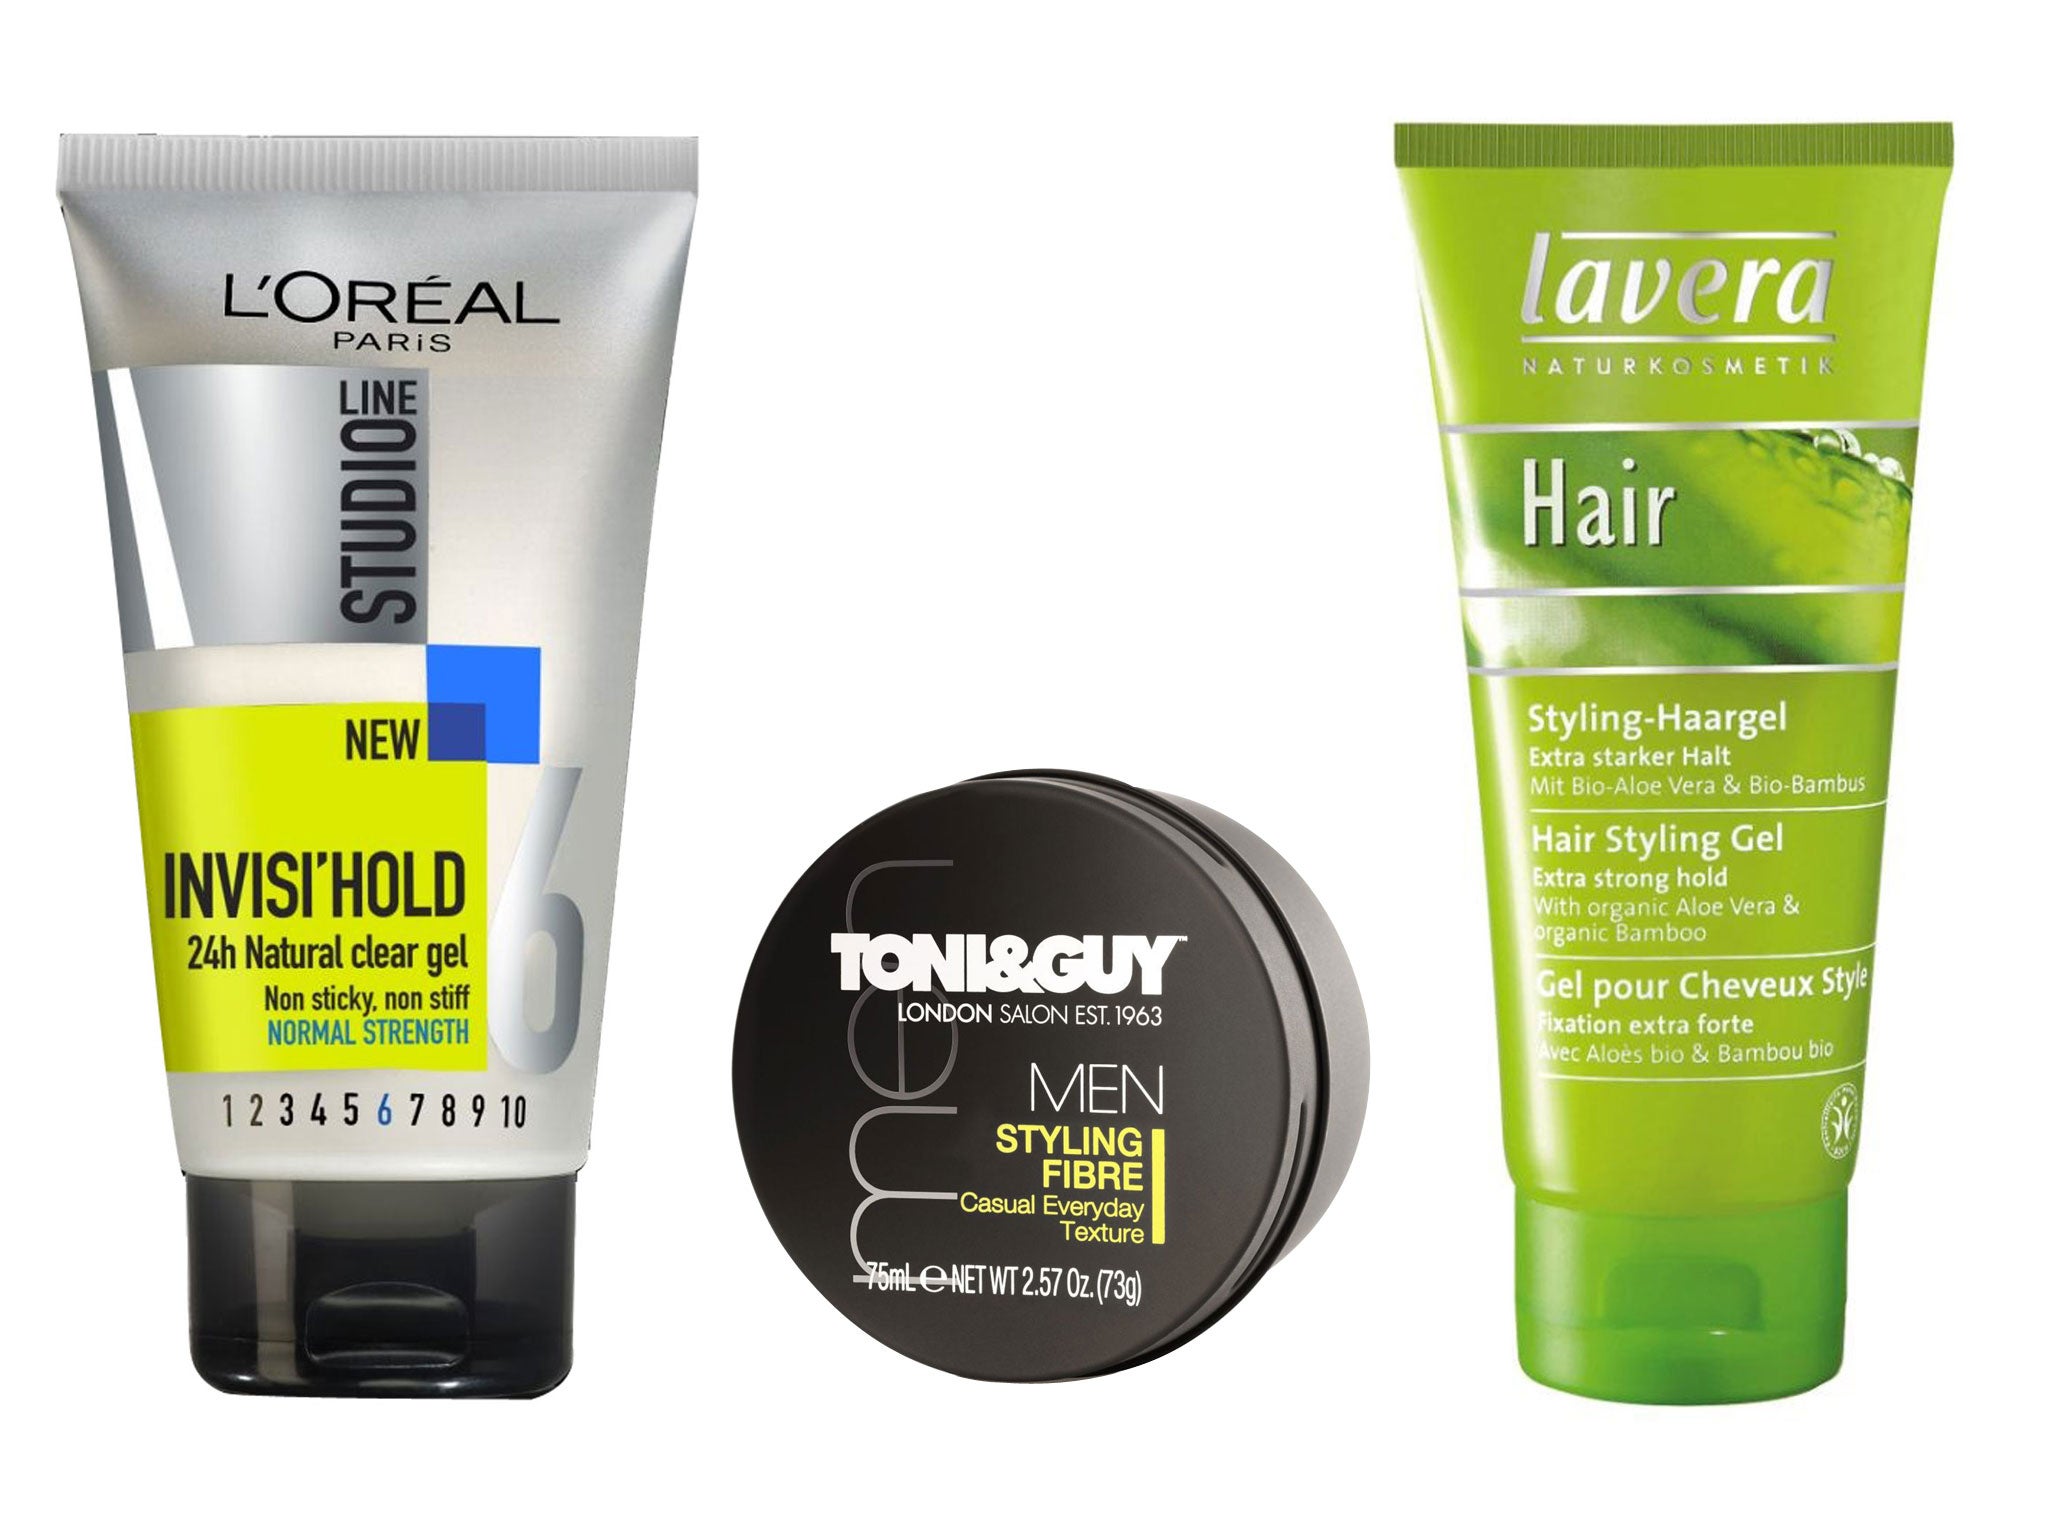 7. "The Best Blonde Hair Products for Men: From Shampoo to Styling" - wide 5